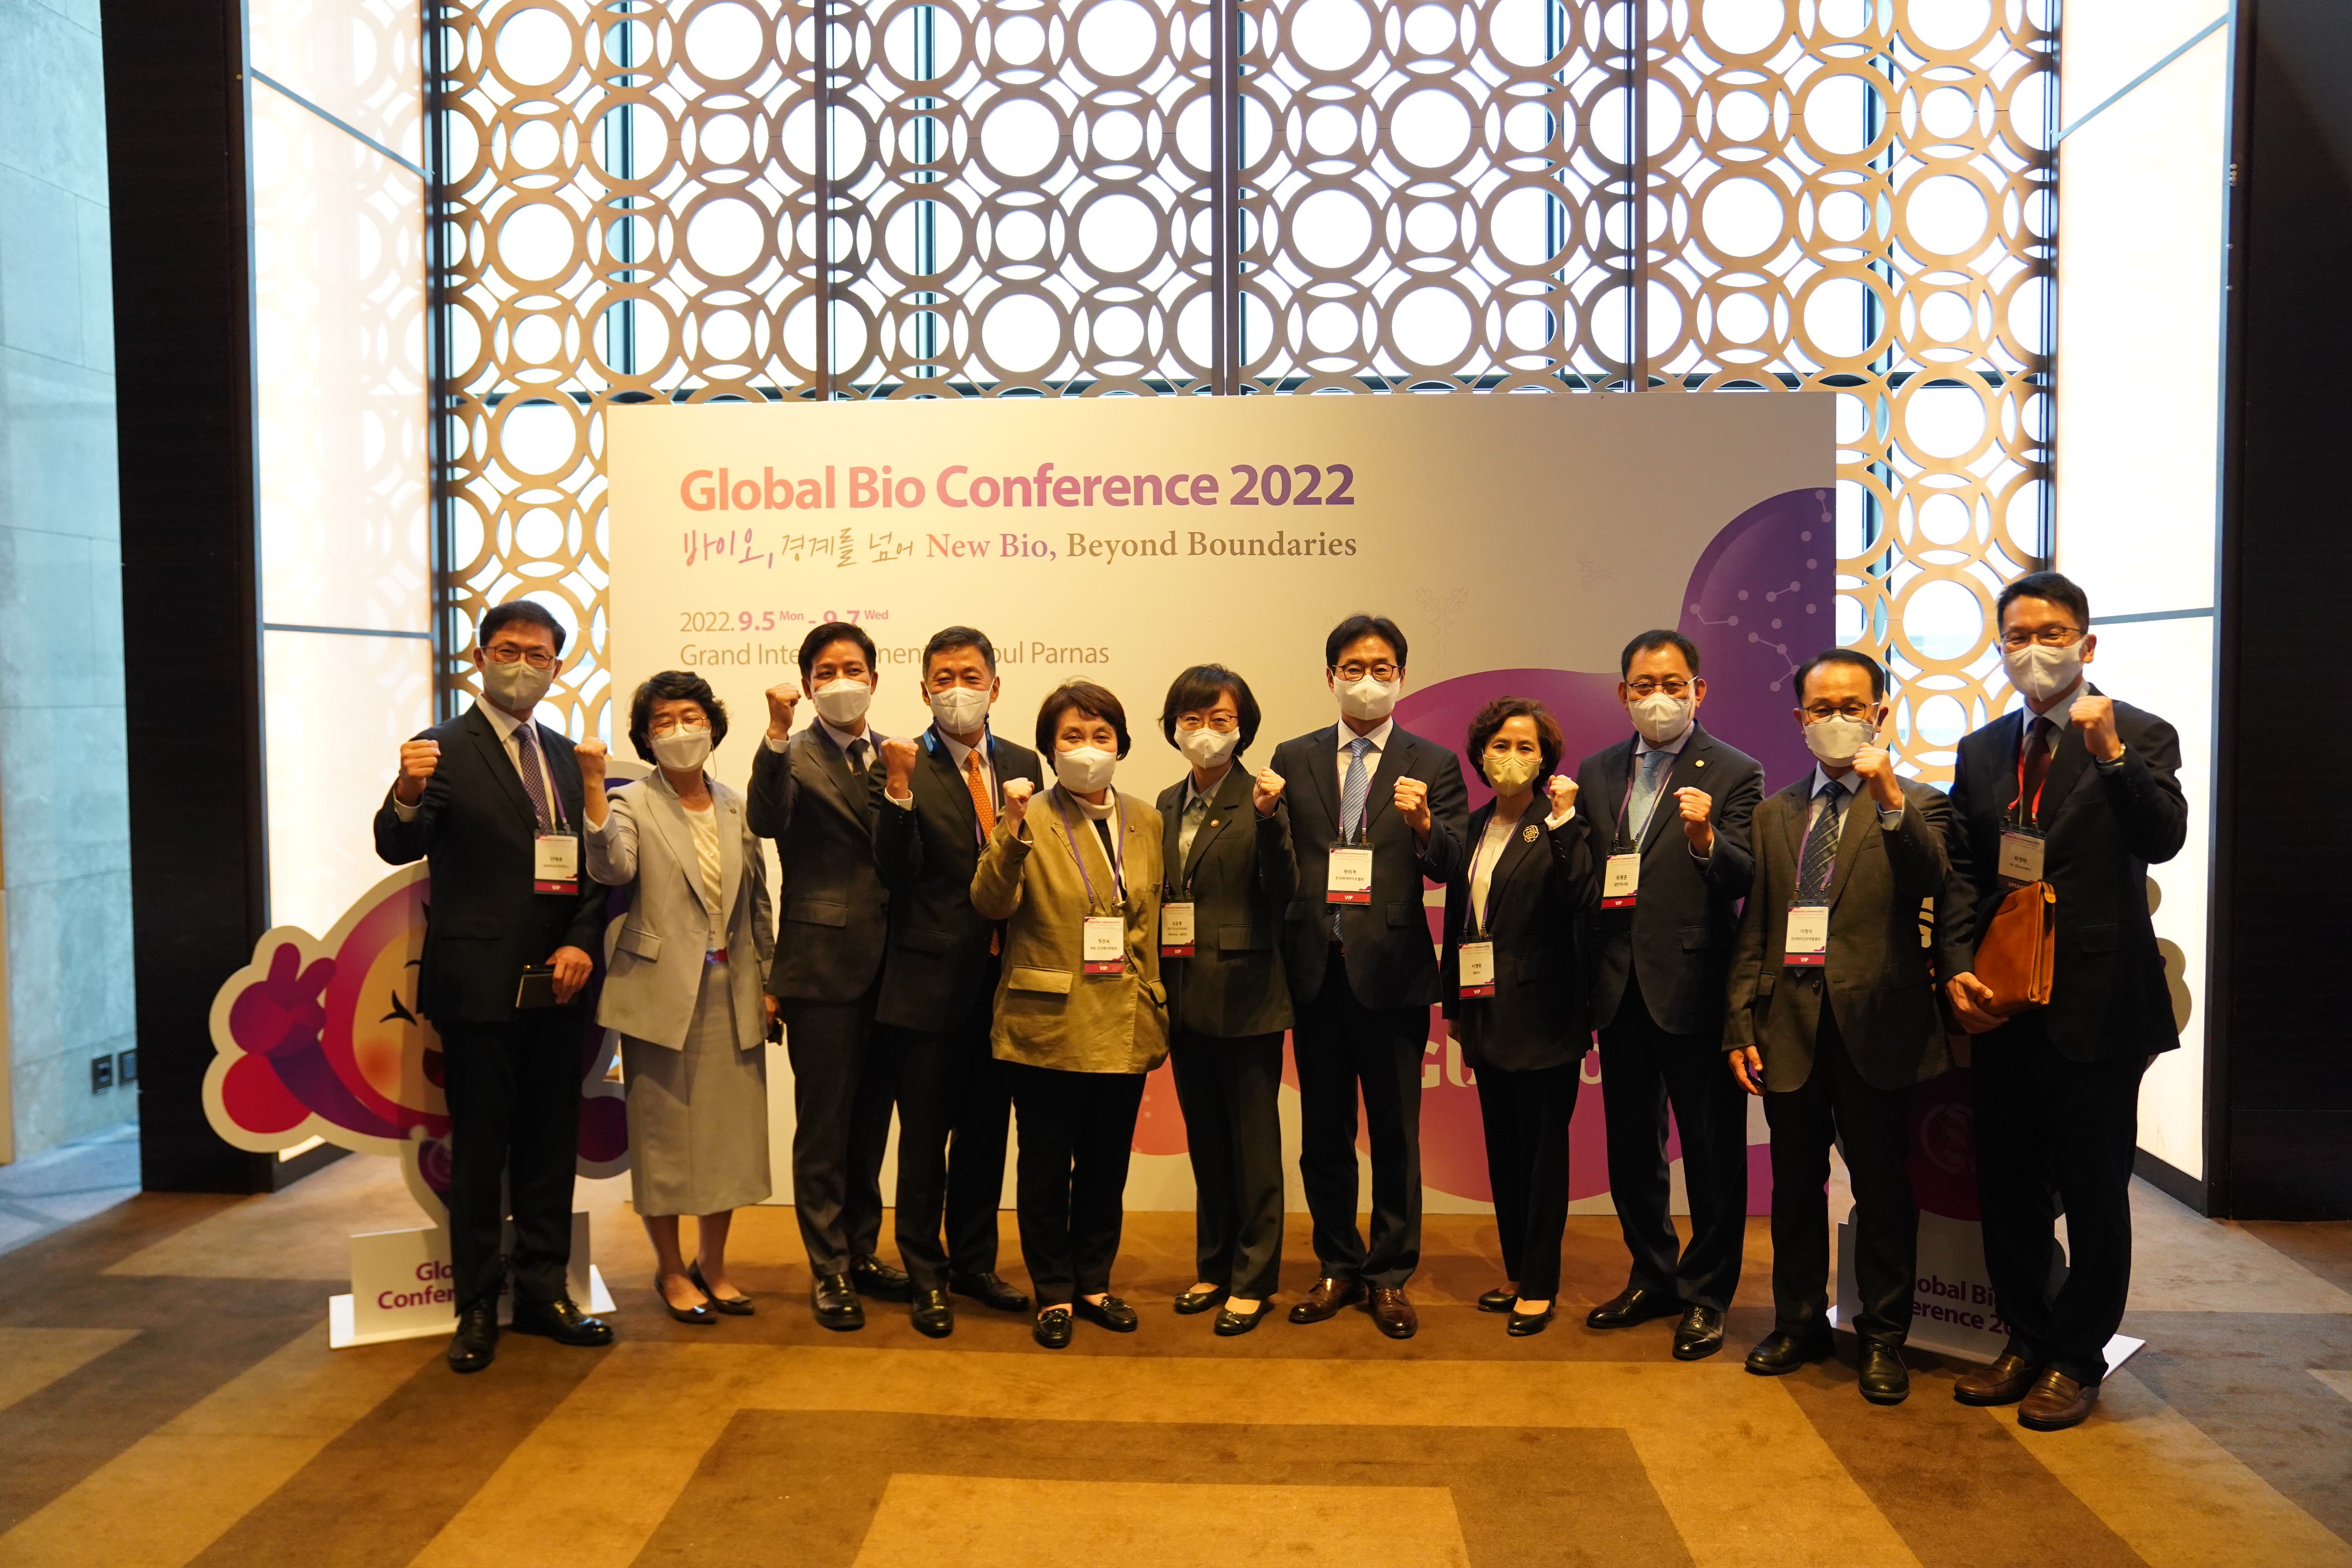 Photo News4 - [Sept. 5, 2022] Minister Attends Global Bio Conference 2022